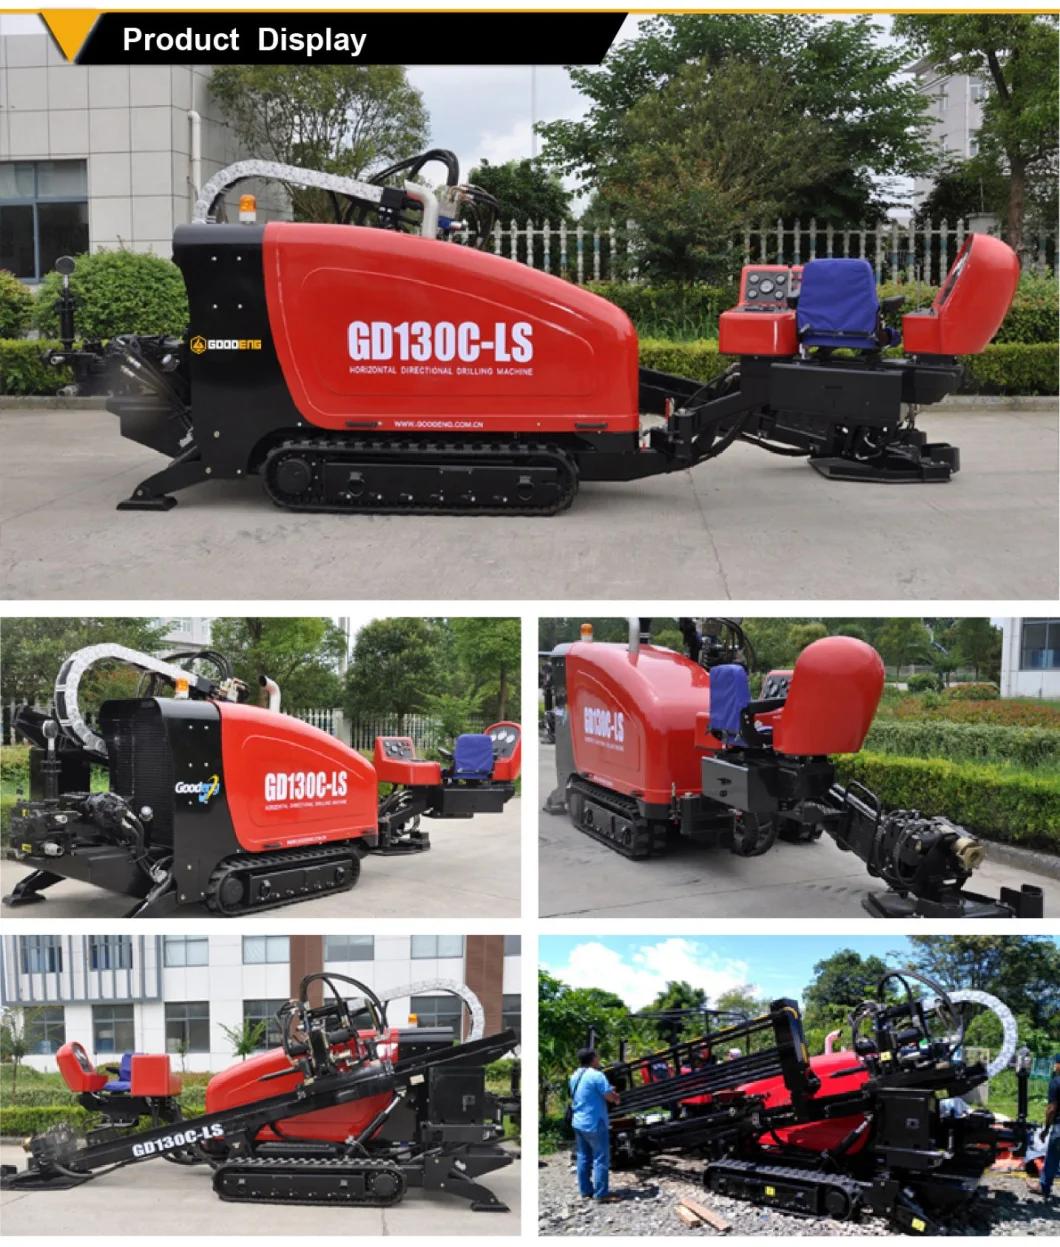 Goodeng GD130C-LS trenchless manchine HDD rig  for electric pipeline